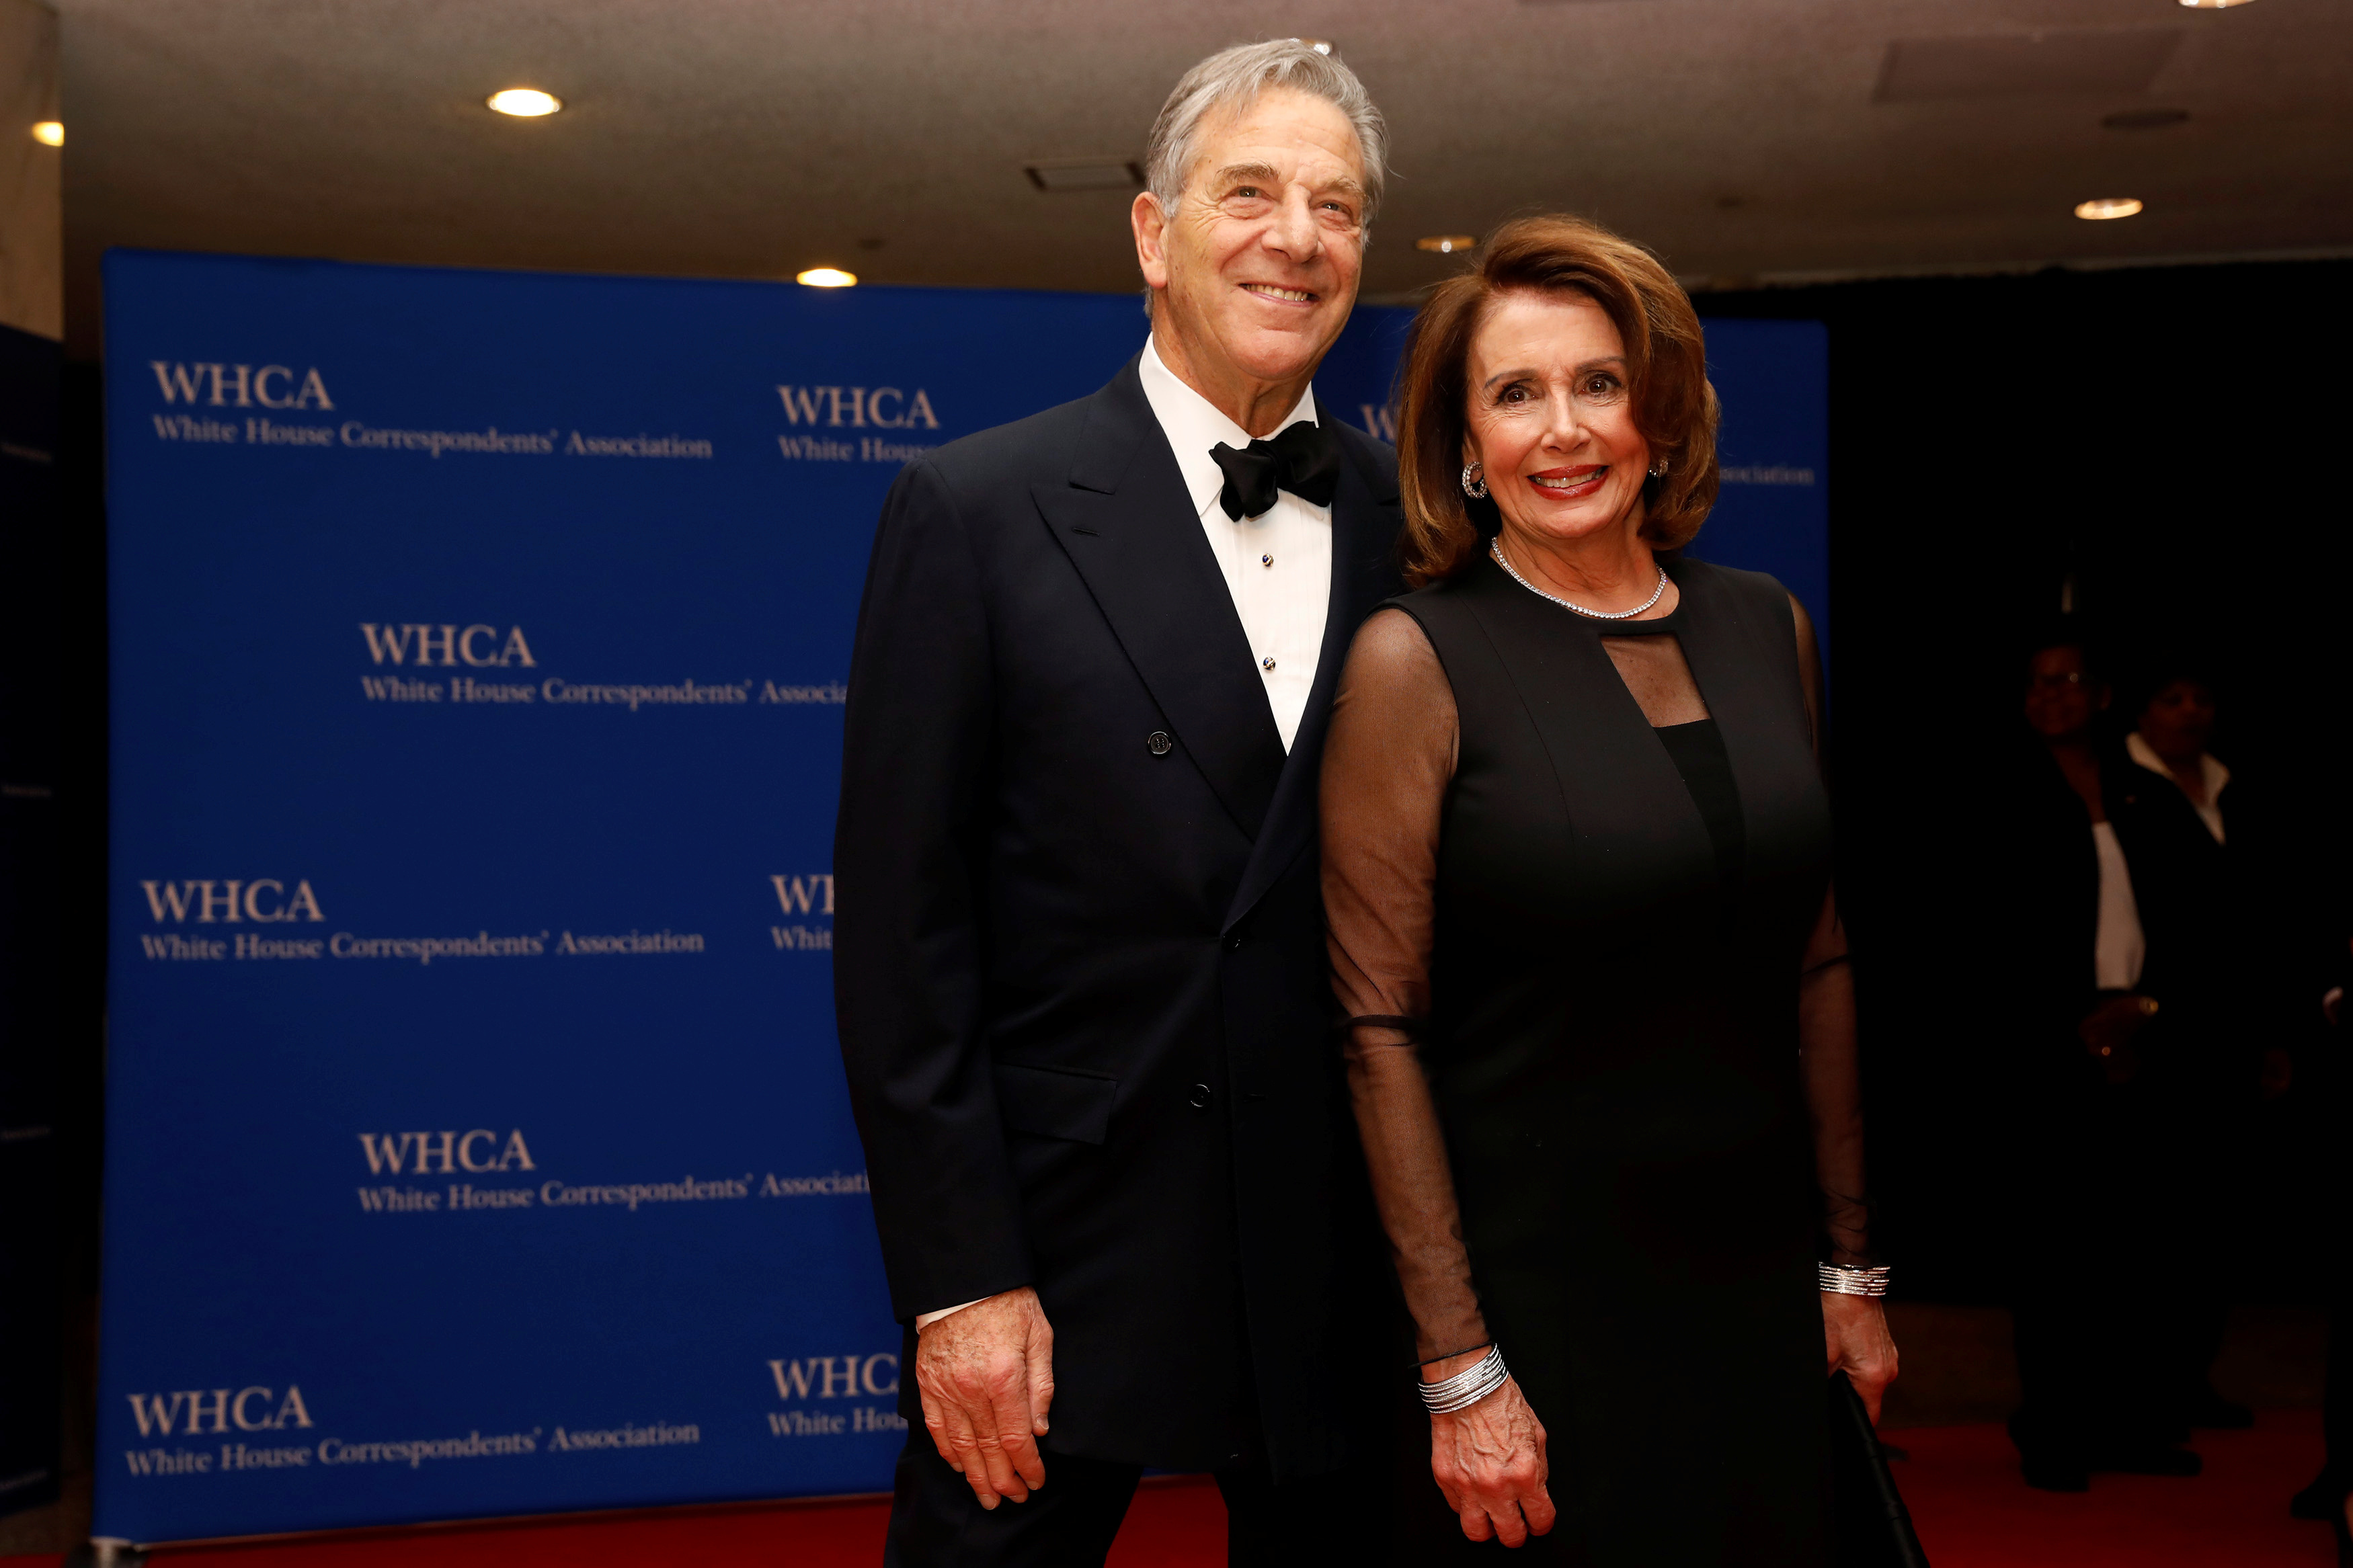 House Minority Leader Pelosi and her husband arrive on the red carpet at the White House Correspondents' Association dinner in Washington